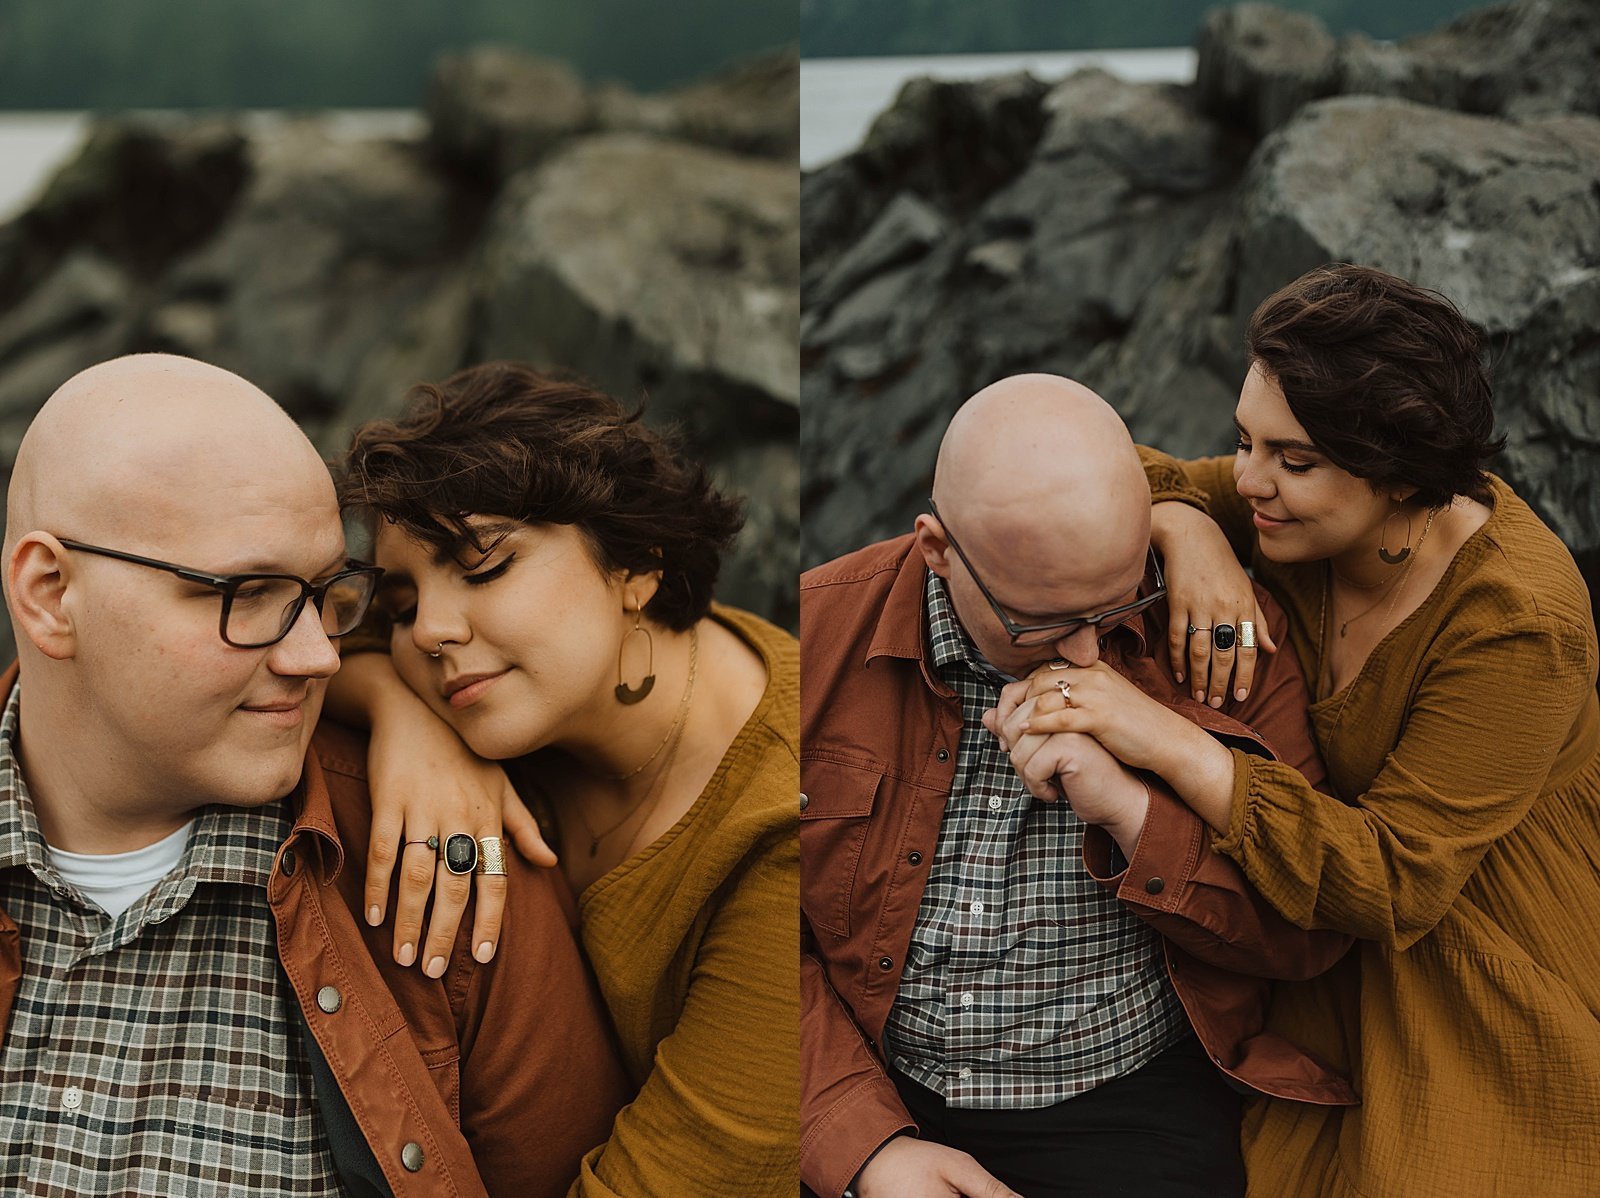  Man grabbing woman’s hand and kissing it closely at photo shoot after cancer remission.  